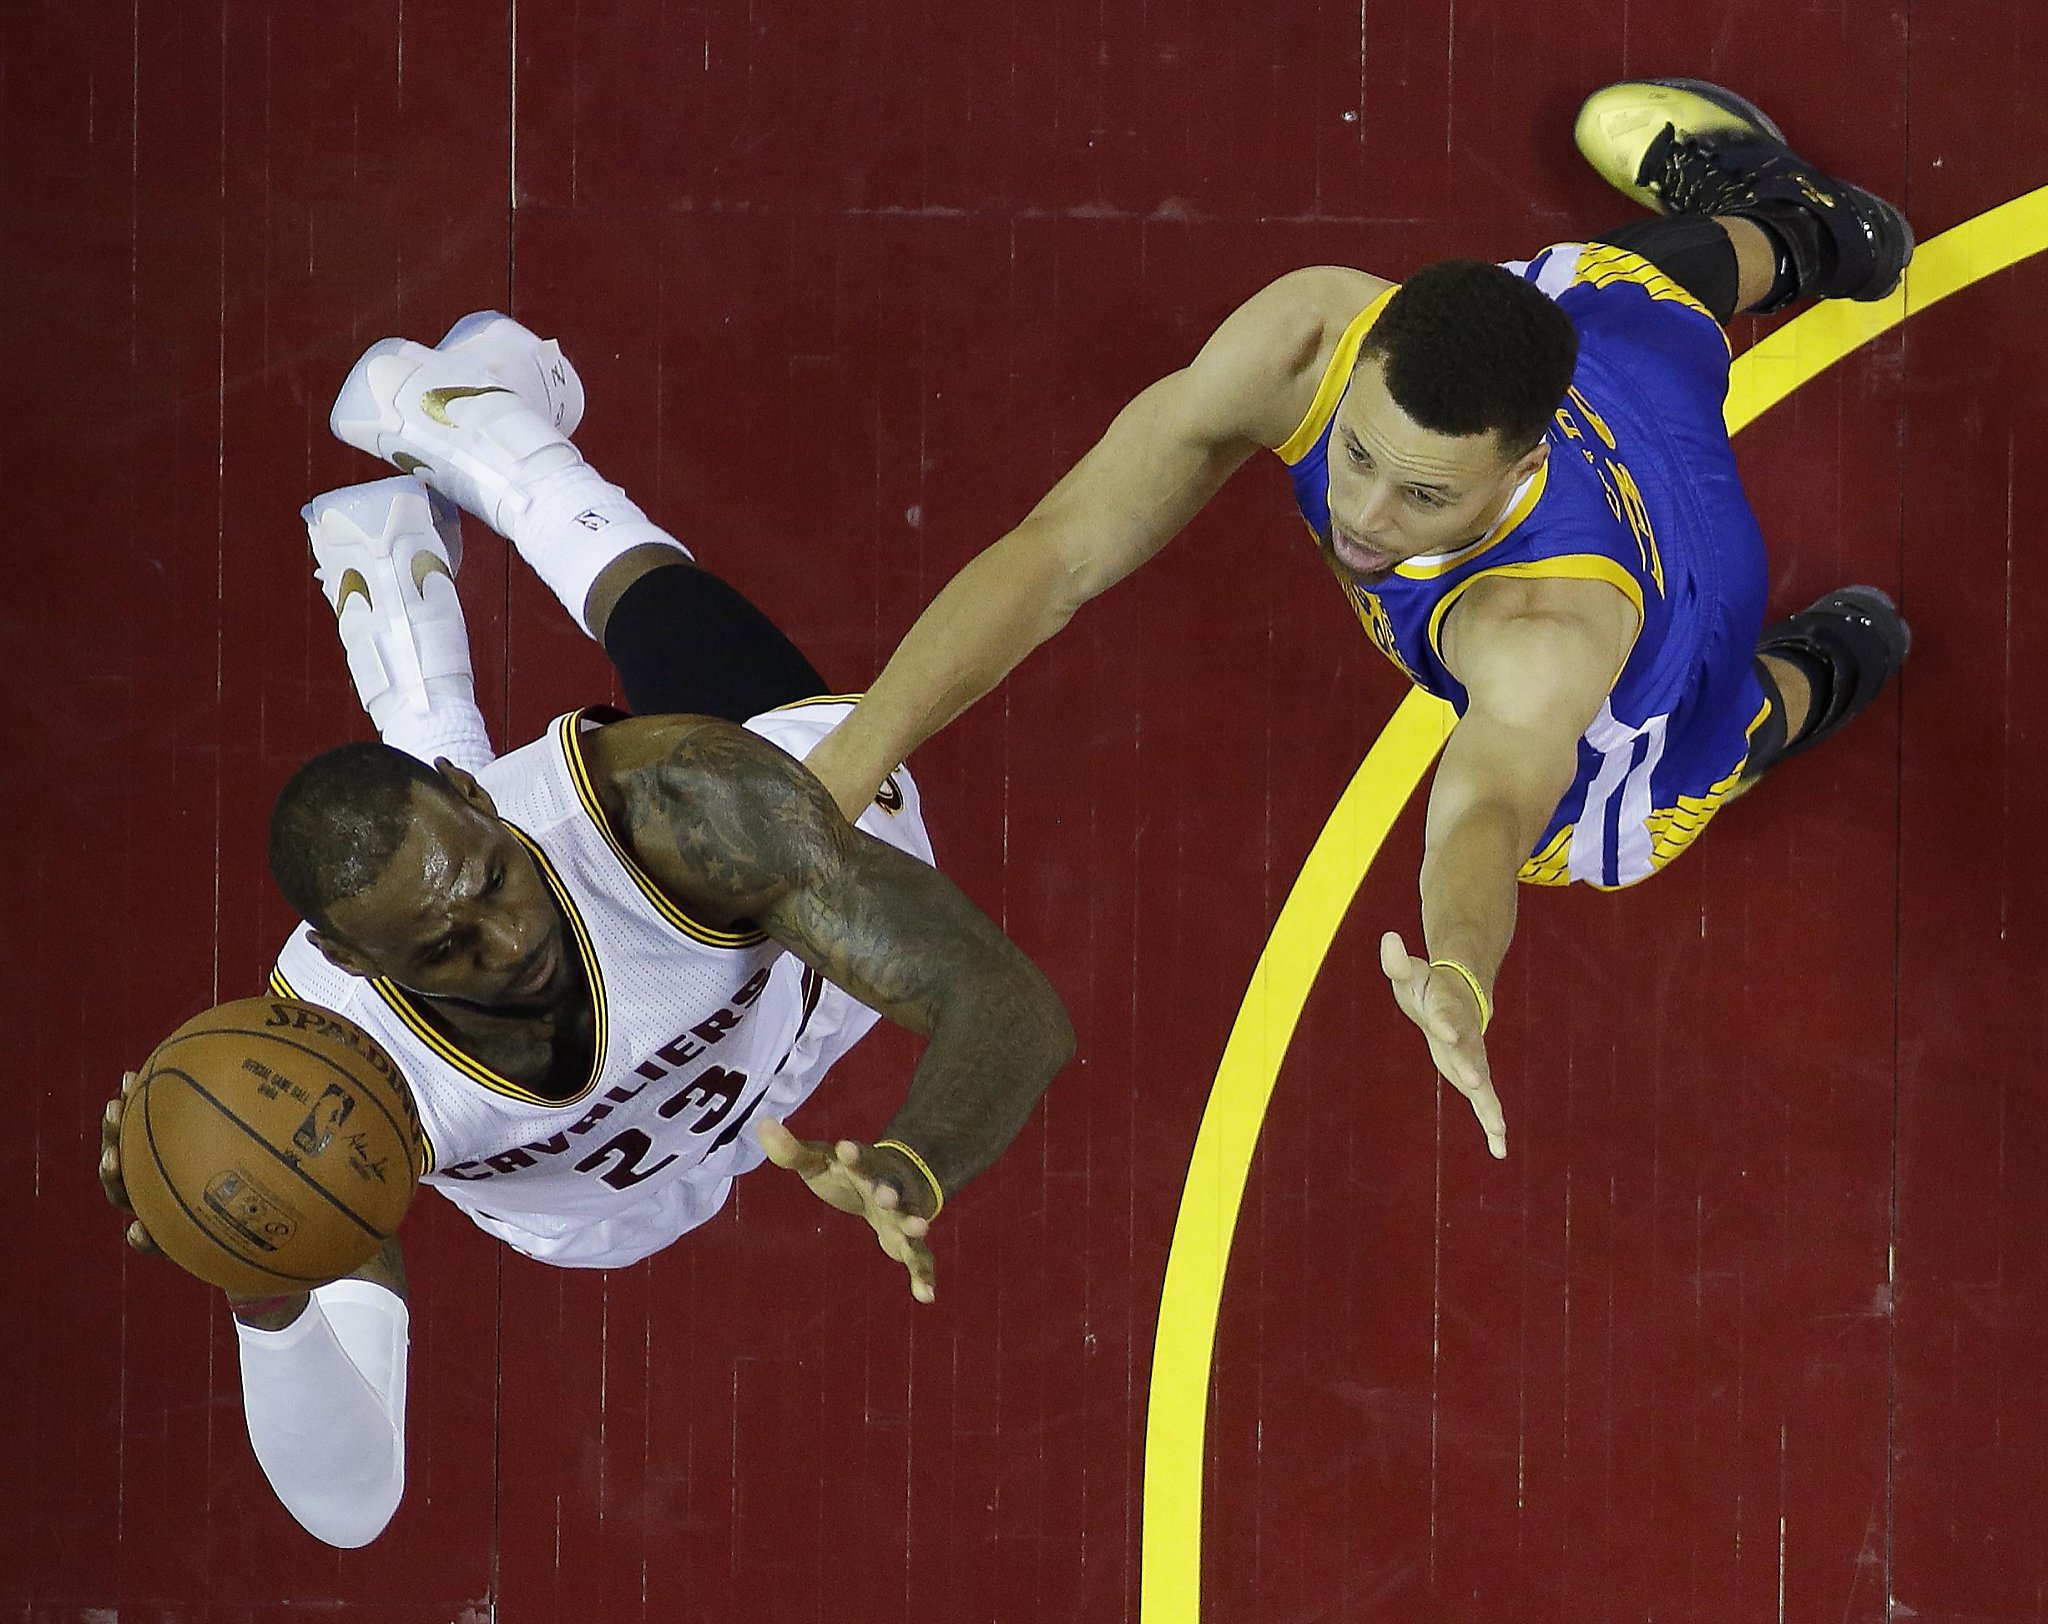 LeBron James vs. Steph Curry: Old rivalries reignite as LA Lakers face  Golden State Warriors